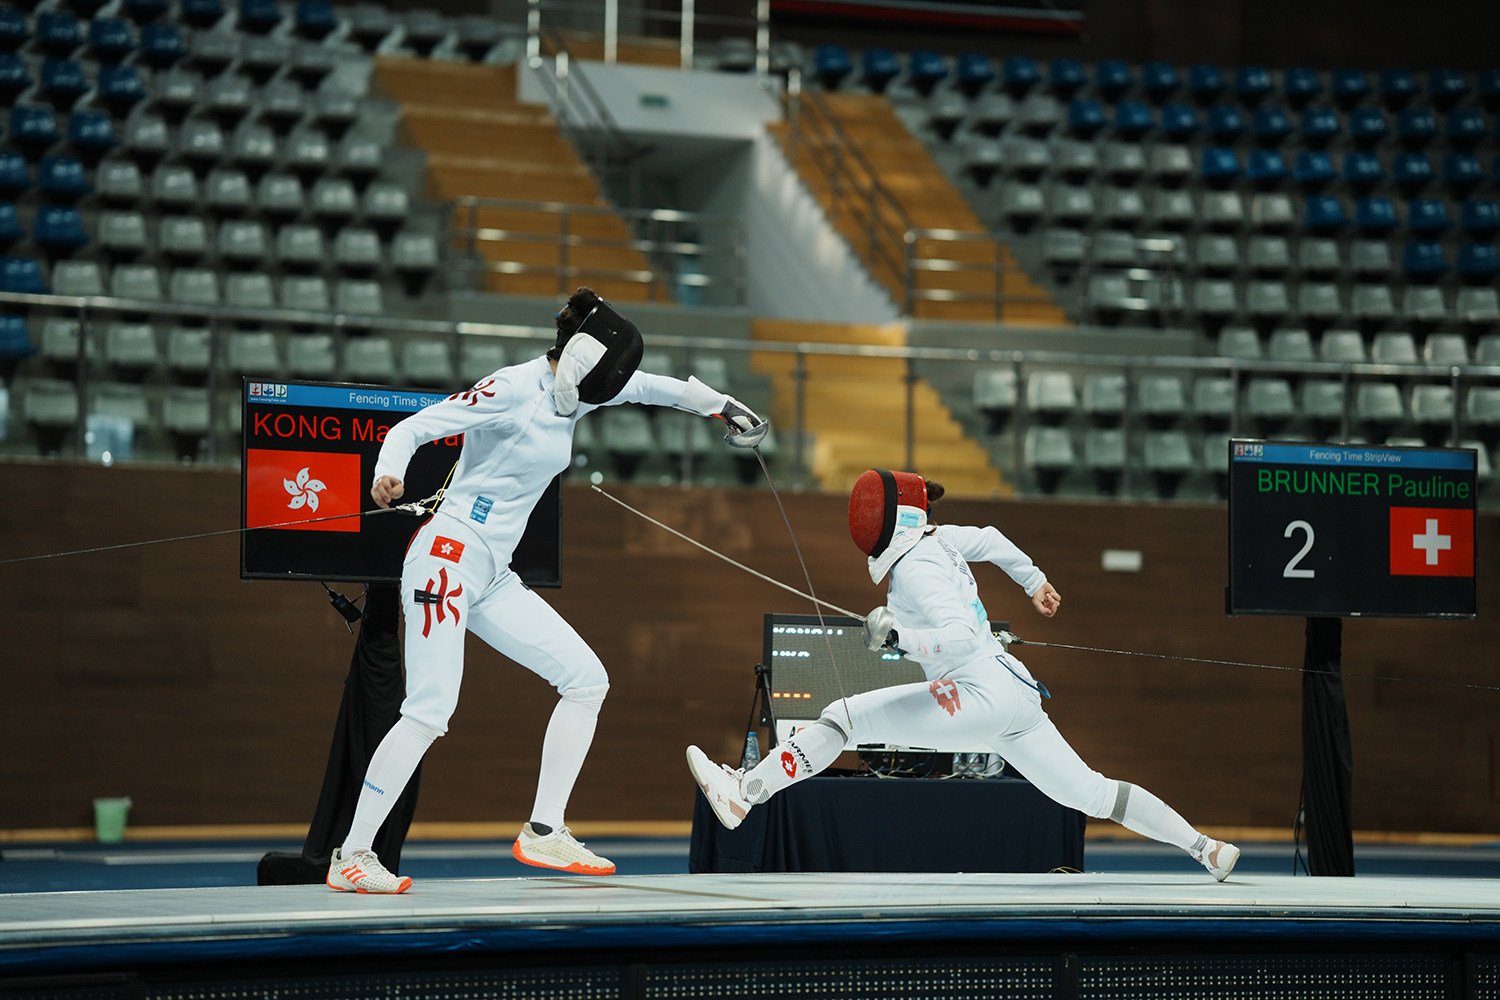 Vivian Kong (left) takes on Pauline Brunner in the final of the women’s epee World Cup event in the United Arab Emirates. Photo: FIE